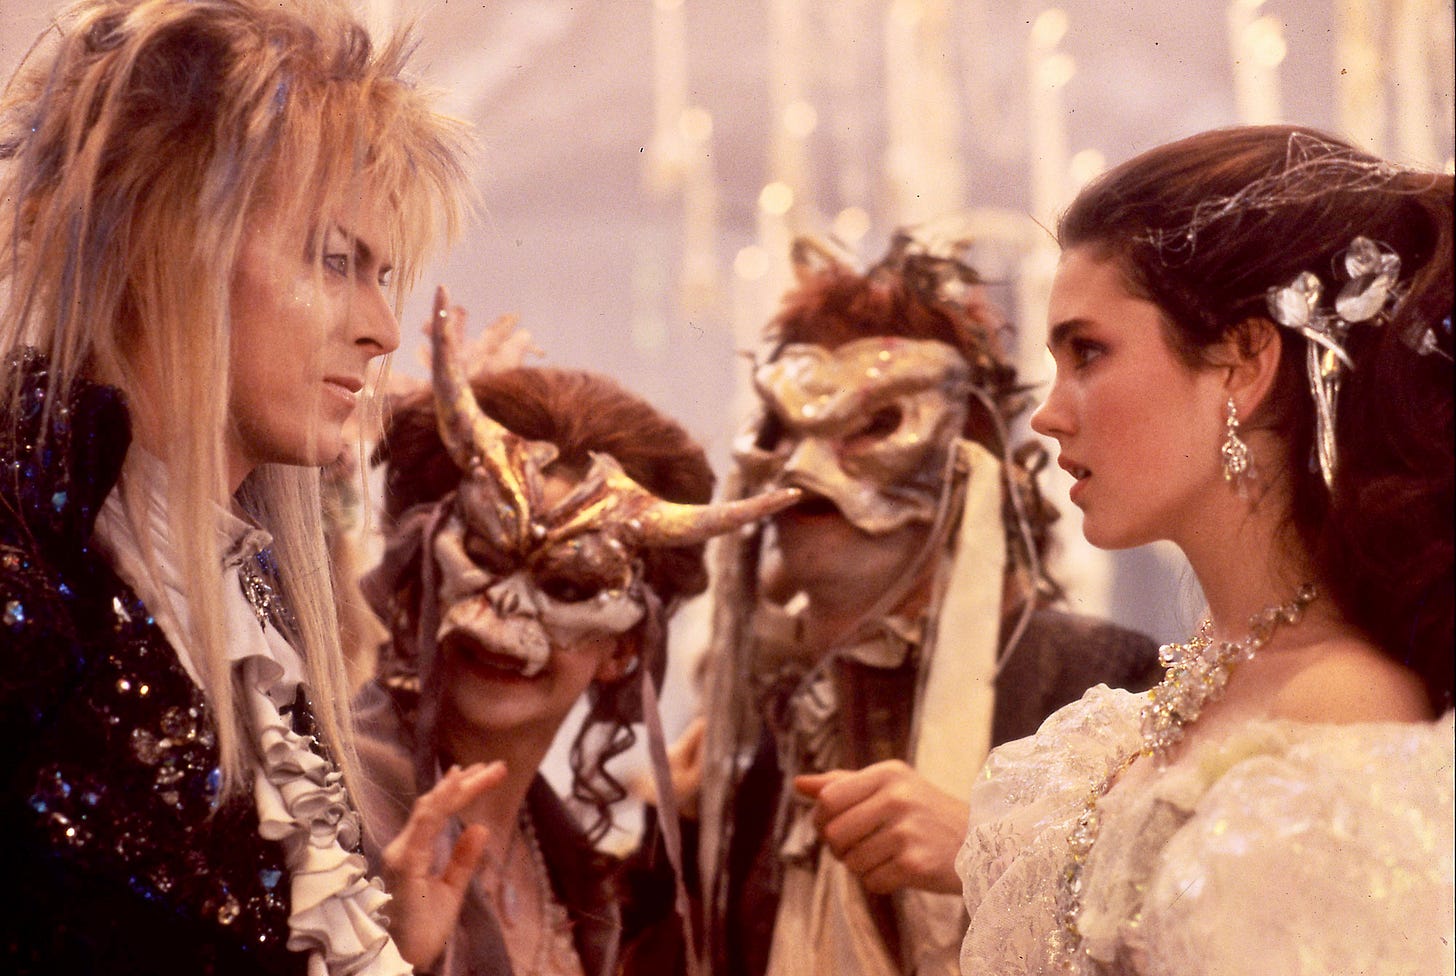 David Bowie and Jennifer Connelly in “Labyrinth” 